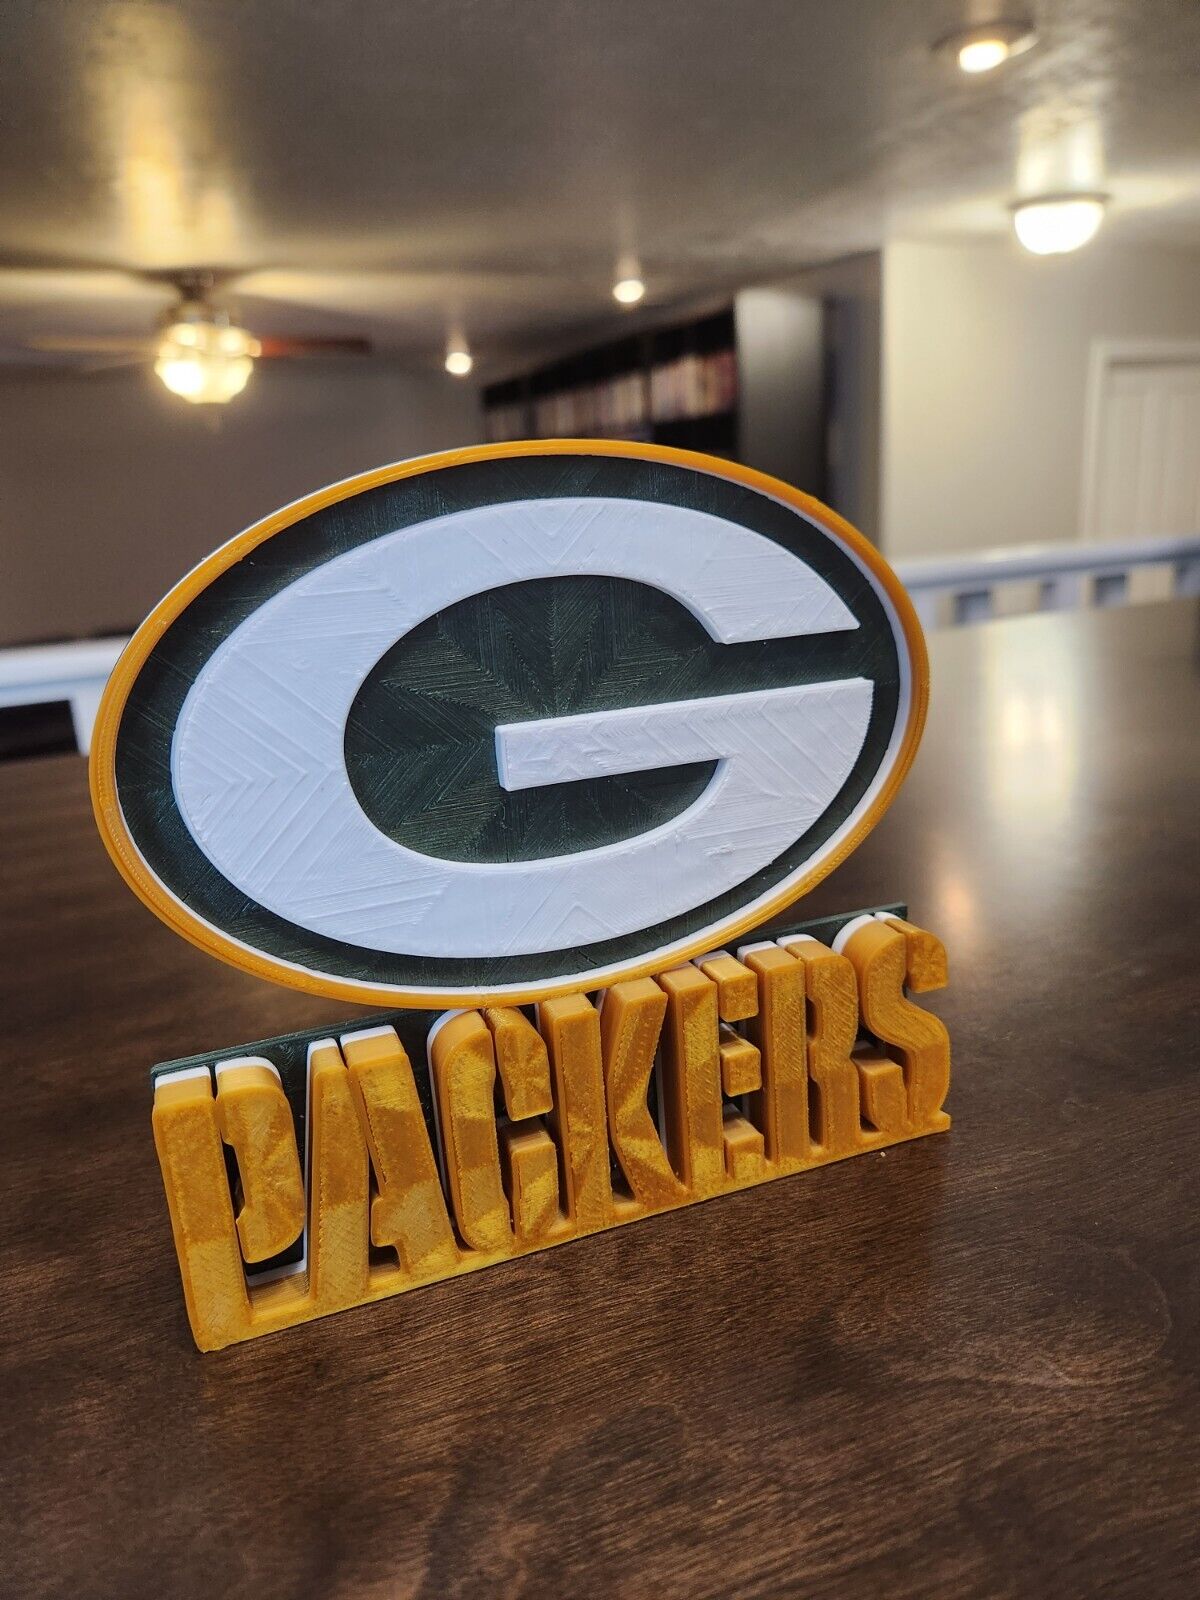 Green Bay Packers 3d Printed Logo 6x7 inch